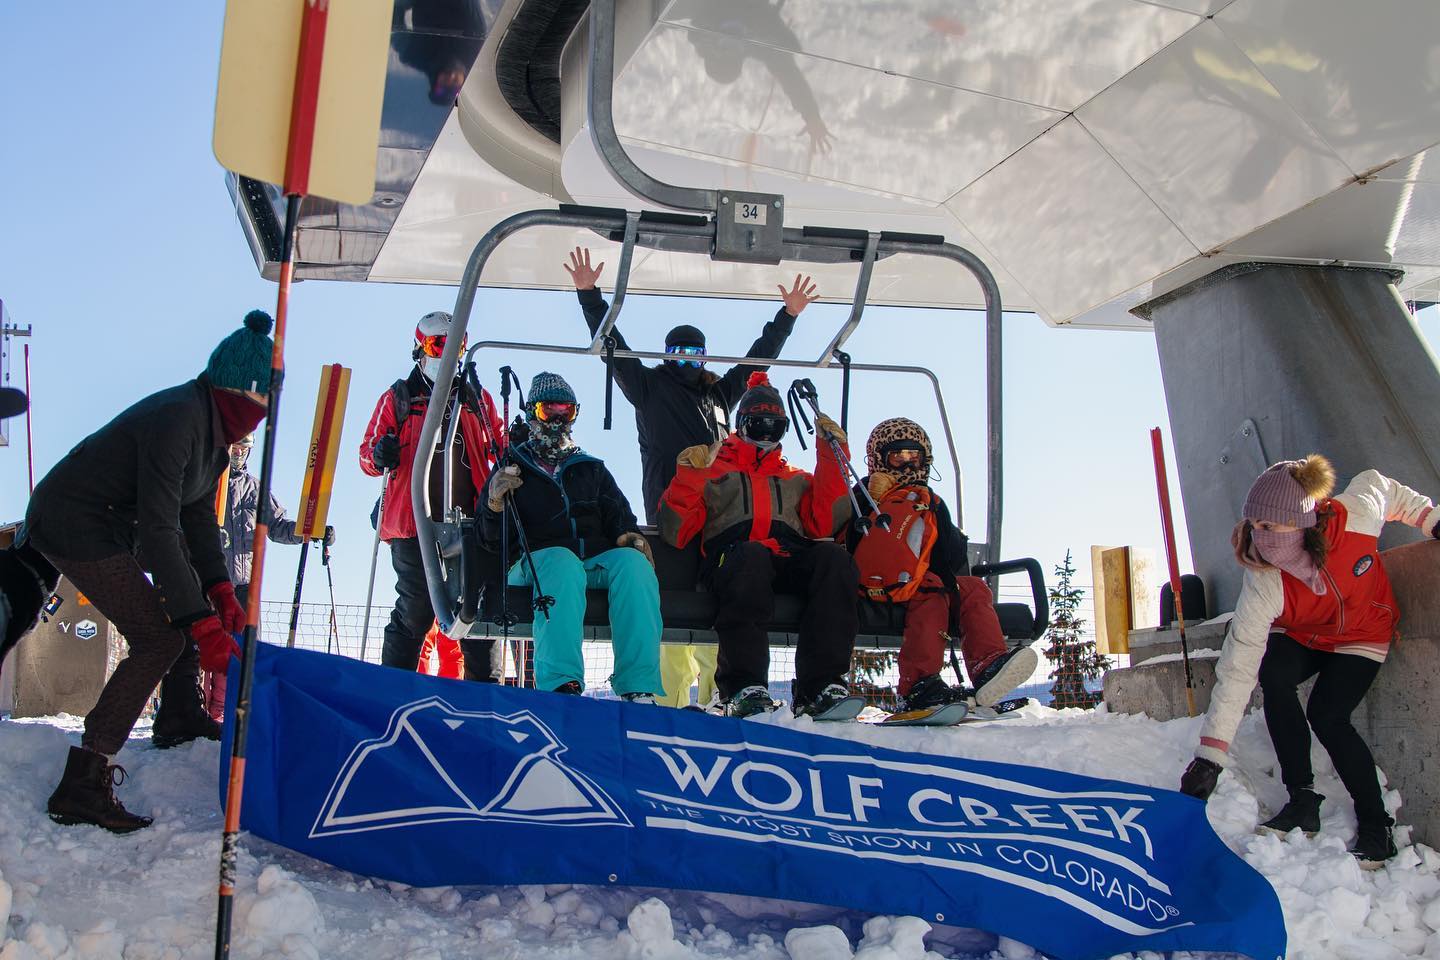 First chairlift at opening day at Wolf Creek Ski Area. Three people sit on a chairlift while employees hold blue Wolf Creek Ski Area banner in front of them